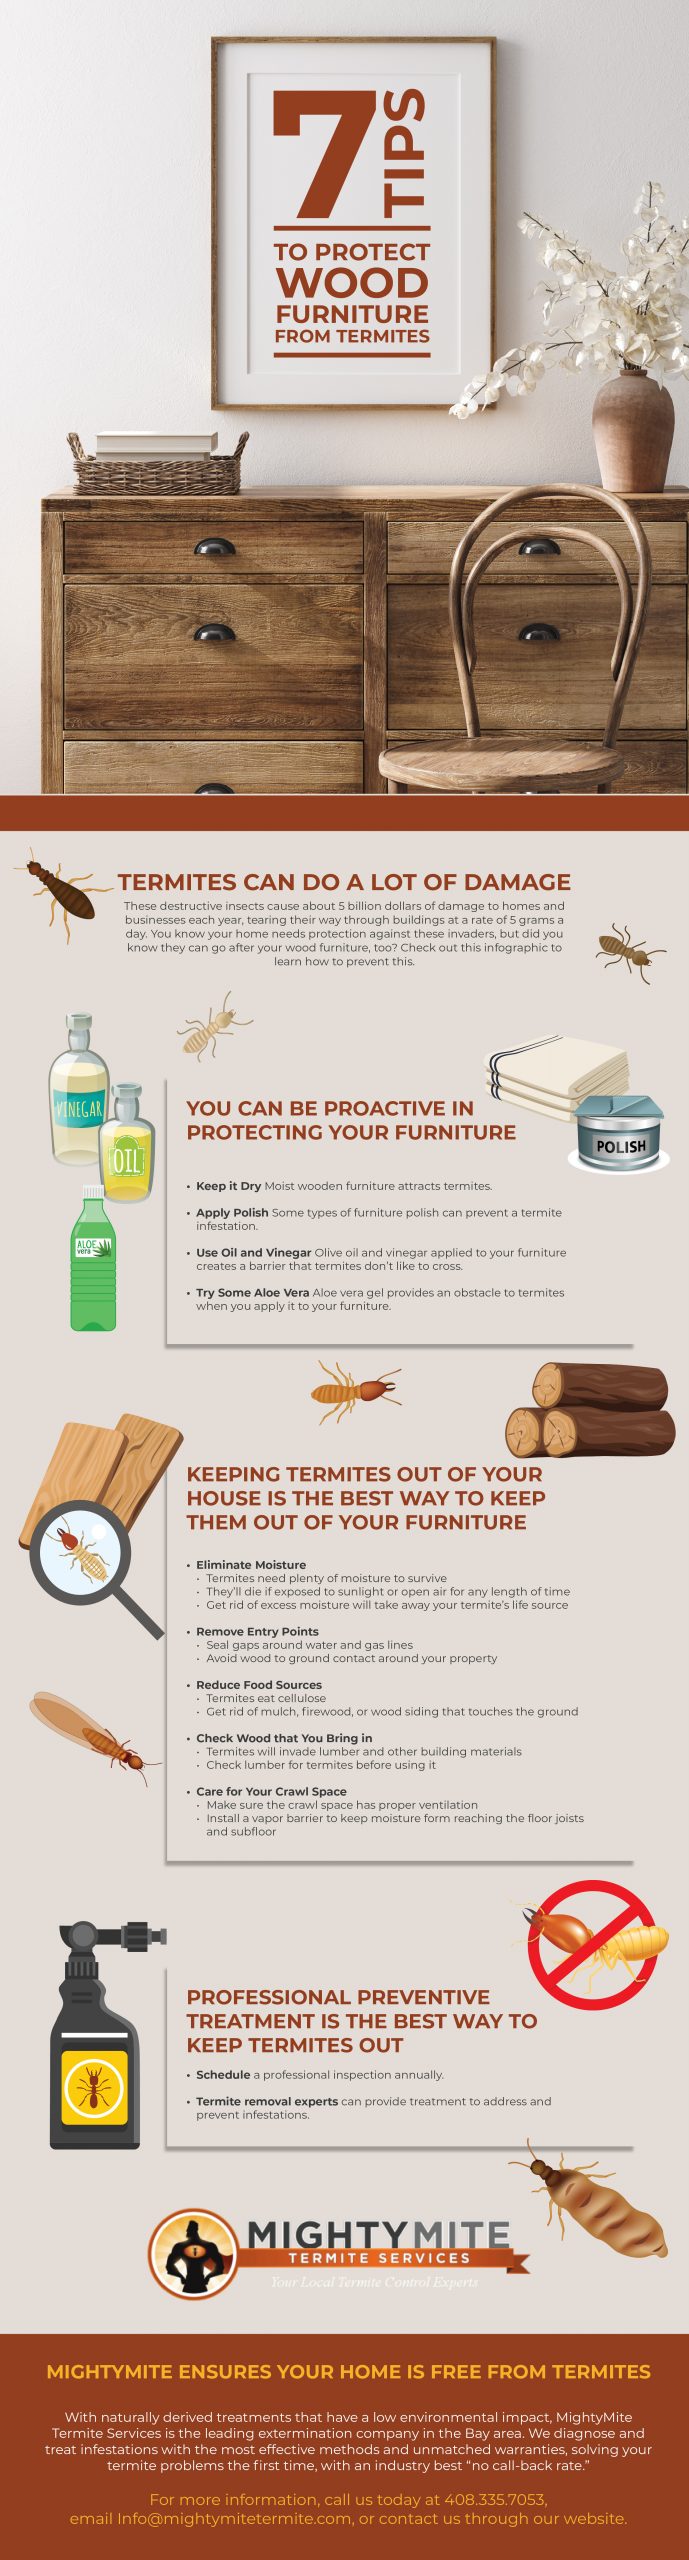 How To Prevent Termite Damage